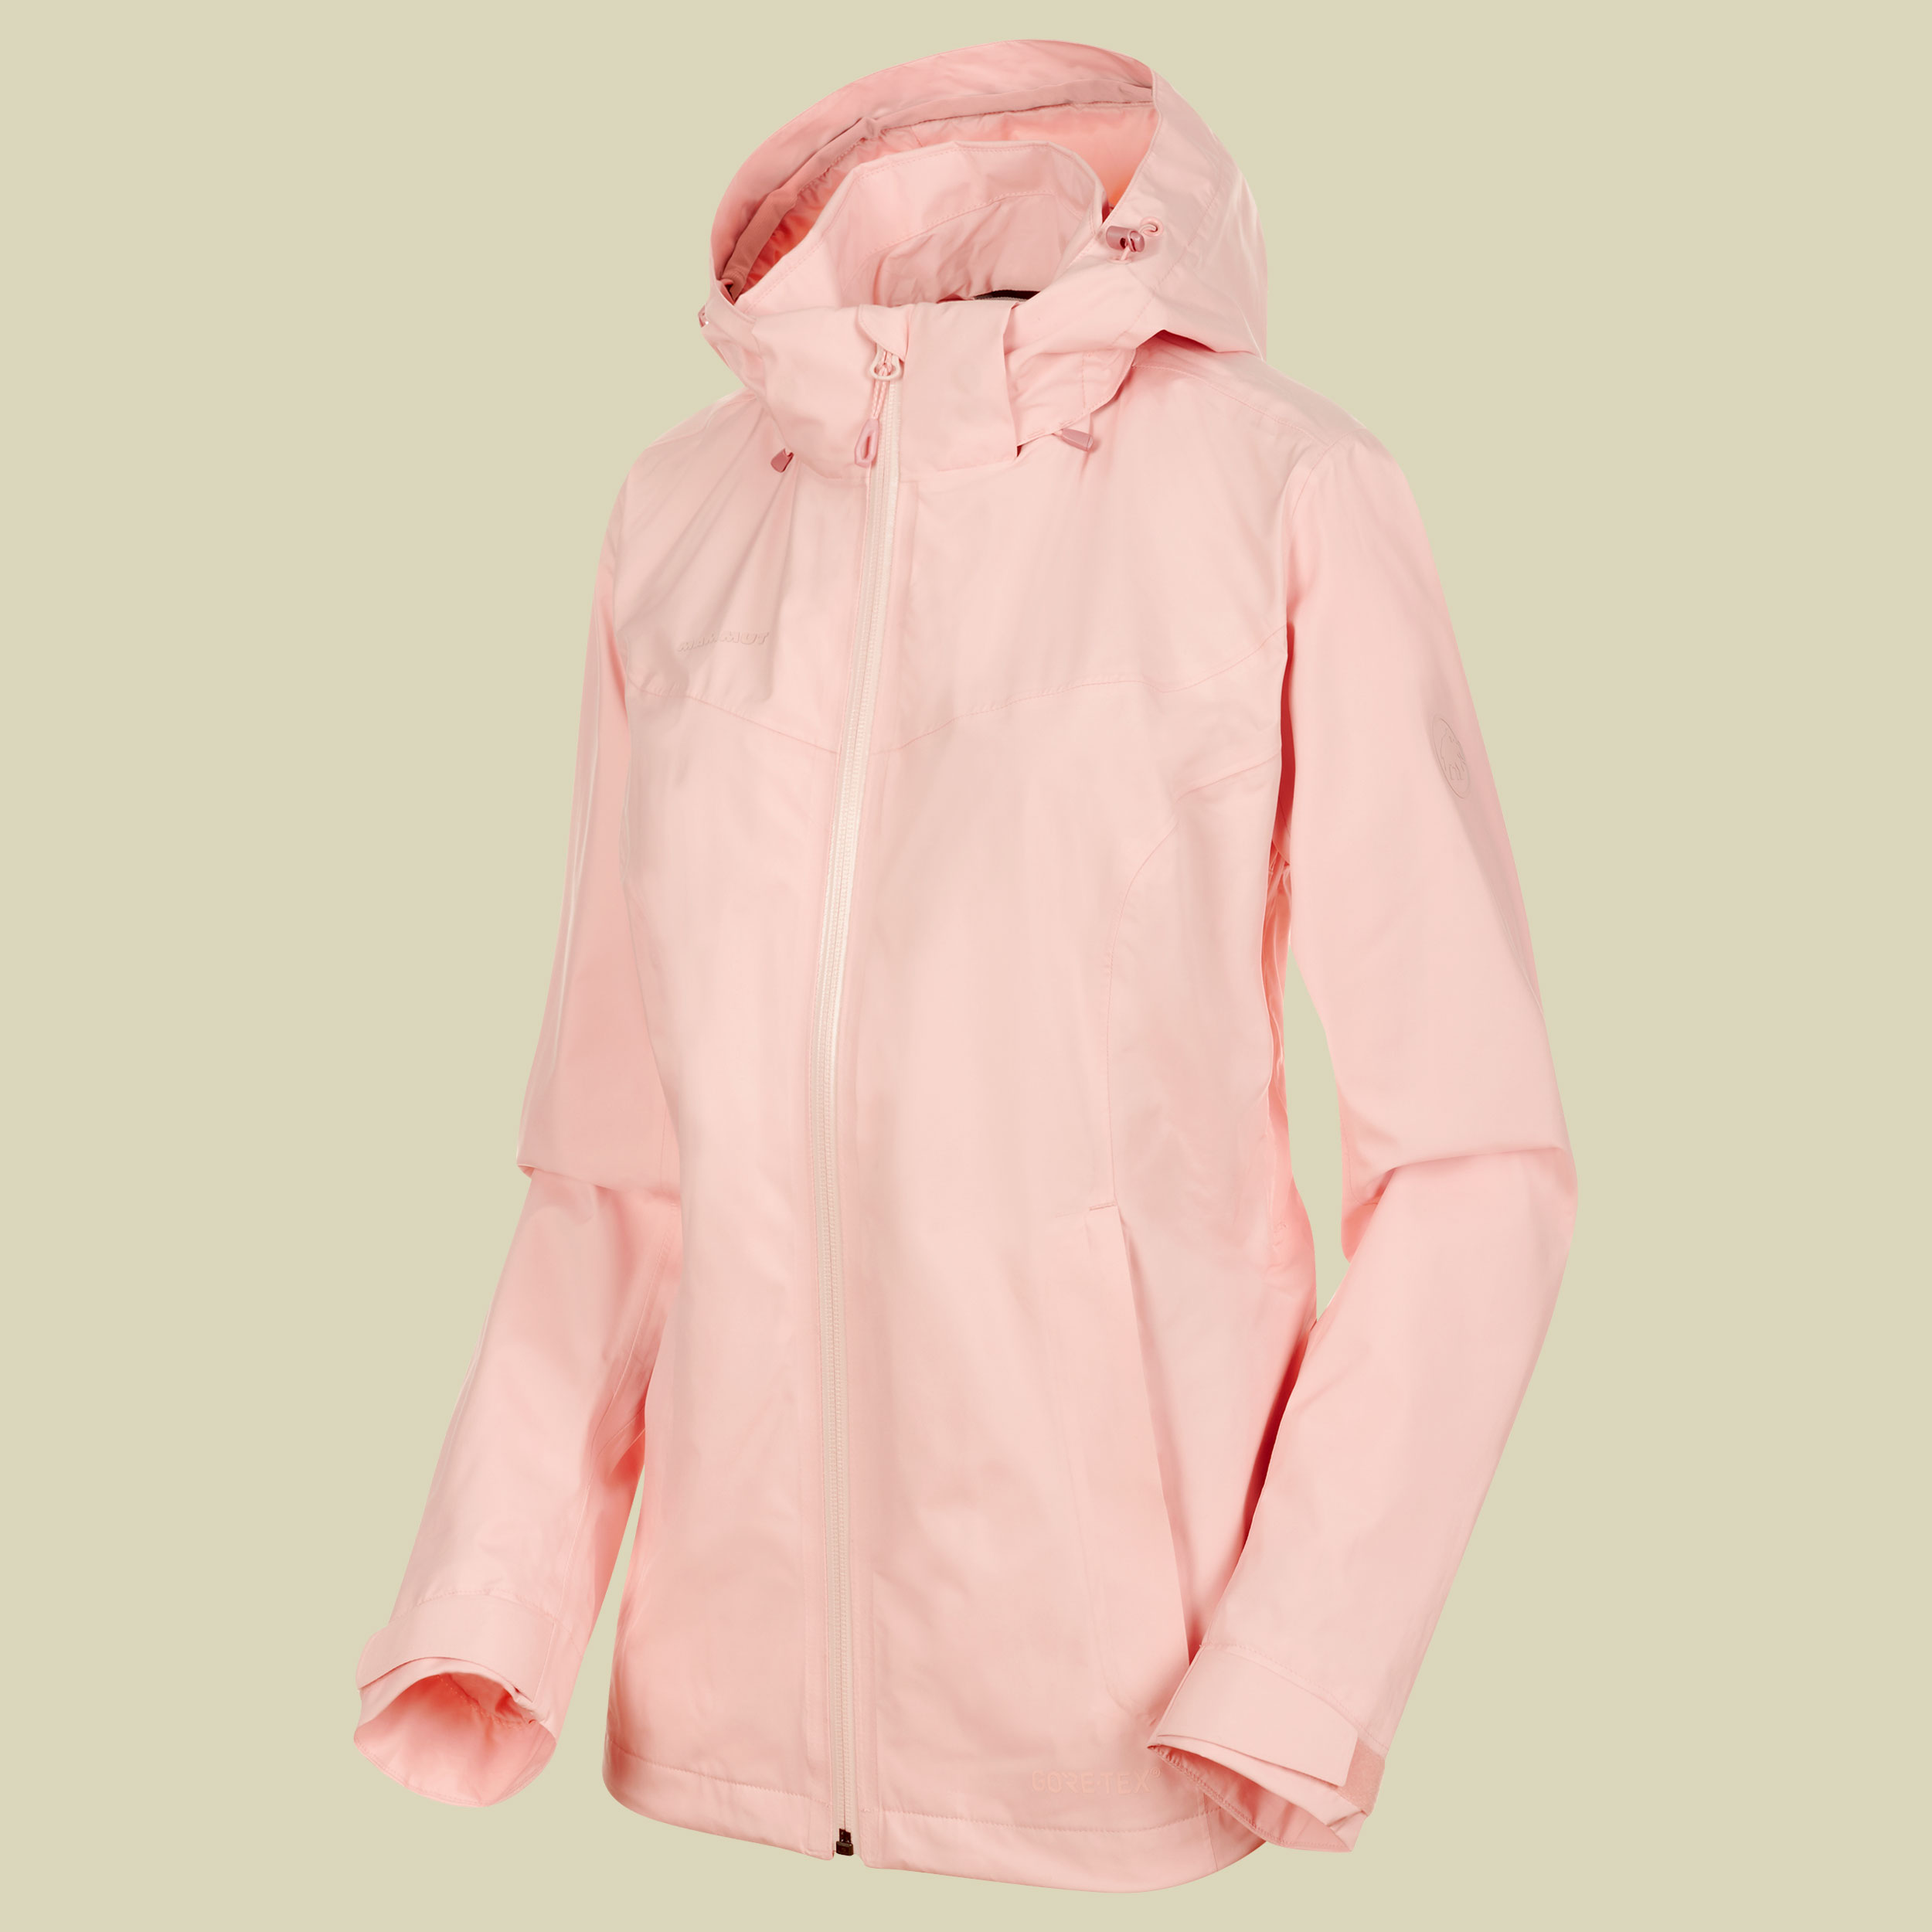 Ayako Tour HS Hooded Jacket Women Größe M  Farbe candy